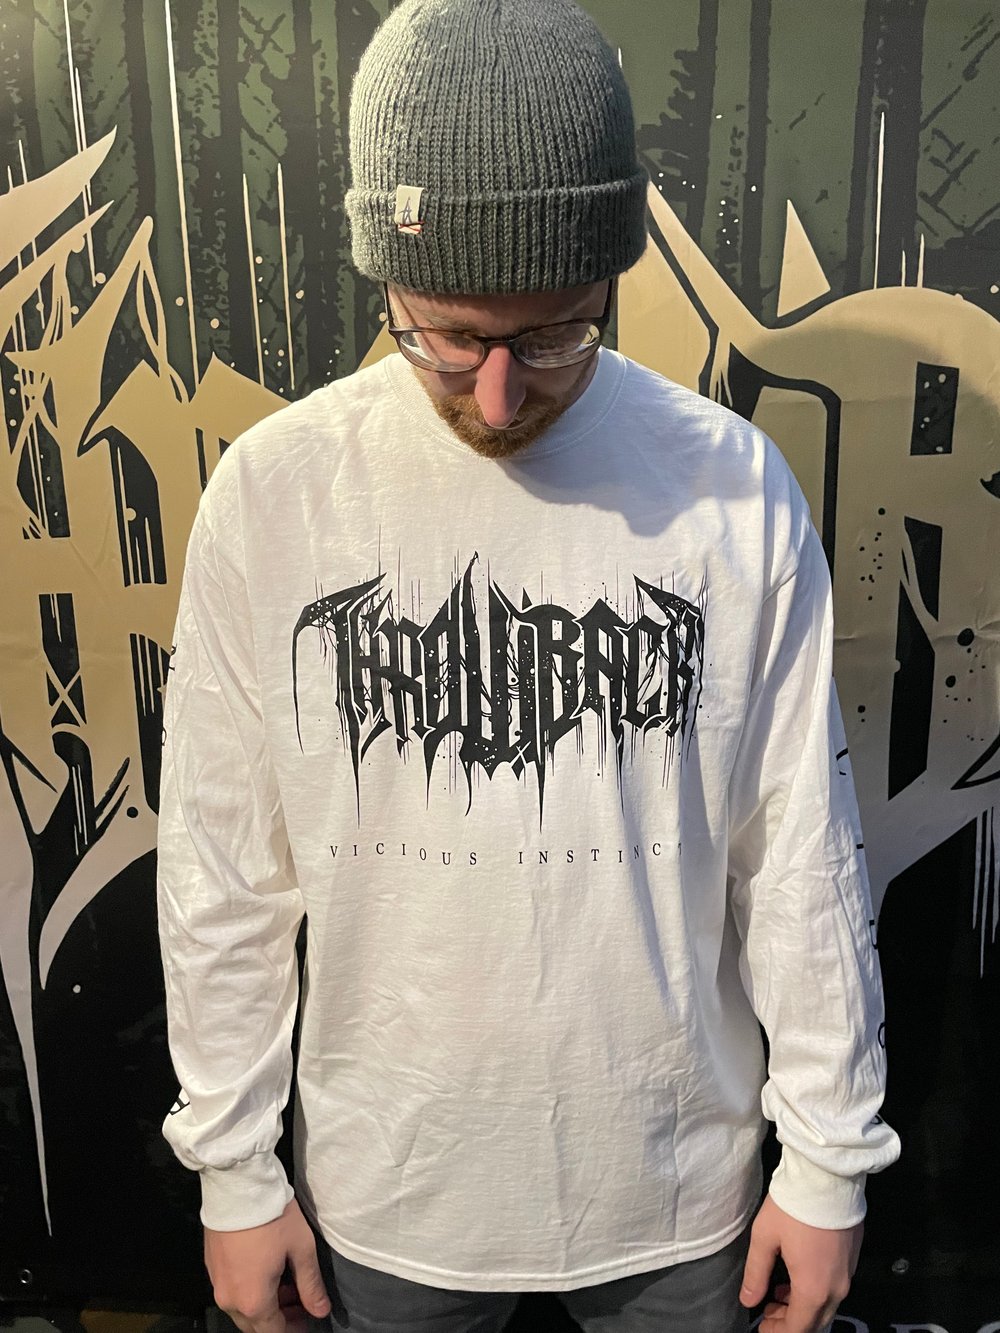 Your Soul Will Find No Rest - Longsleeve